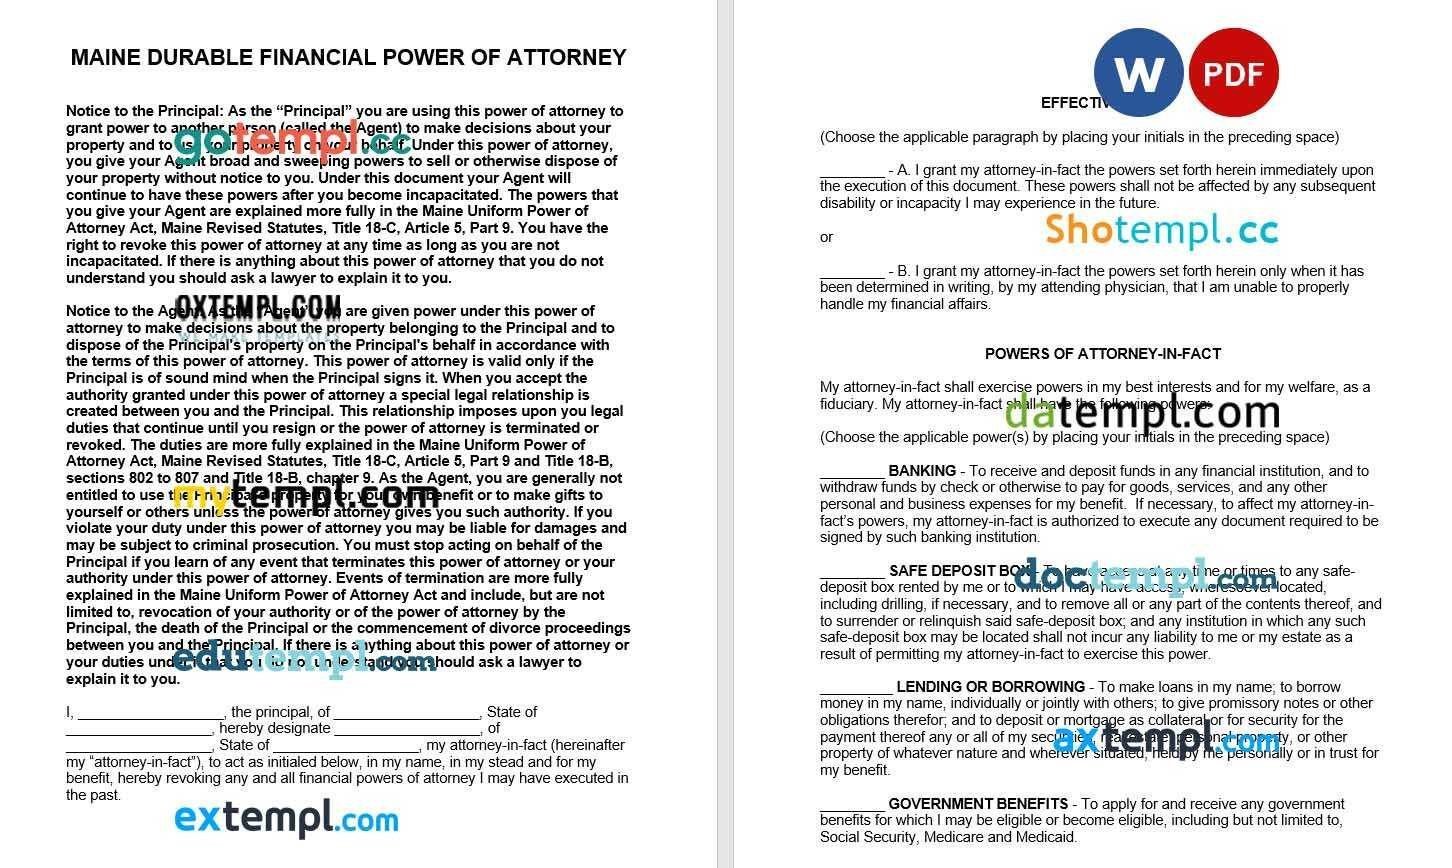 Maine Durable Finances Power of Attorney Form example, fully editabl